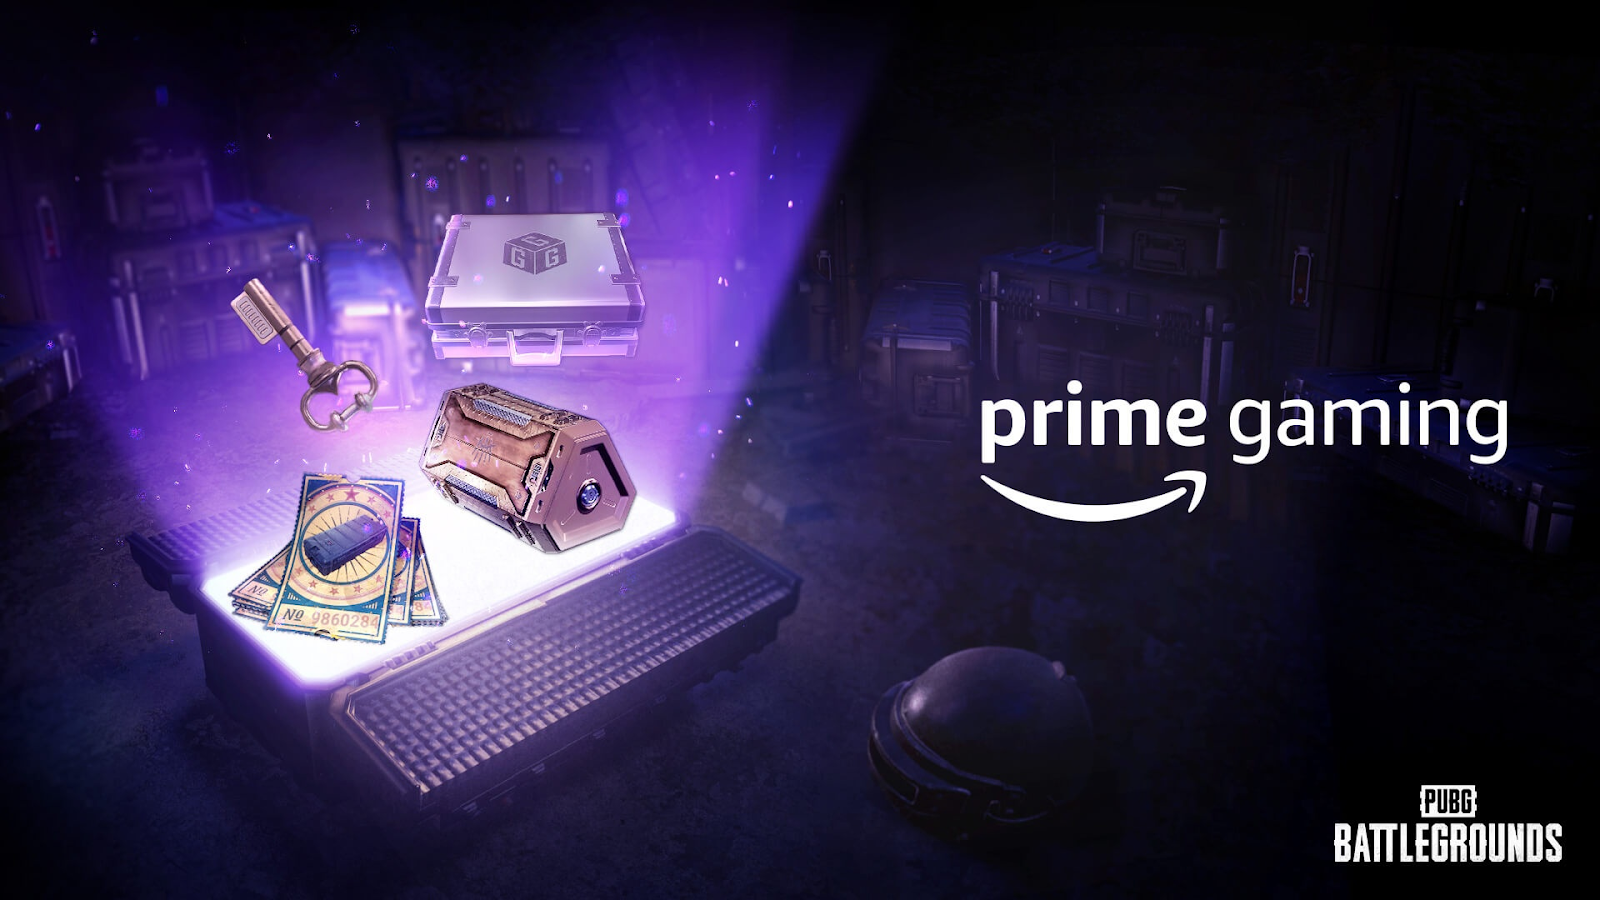 Prime's latest bonus is free mobile game content, starting with  exclusive PUBG Mobile loot